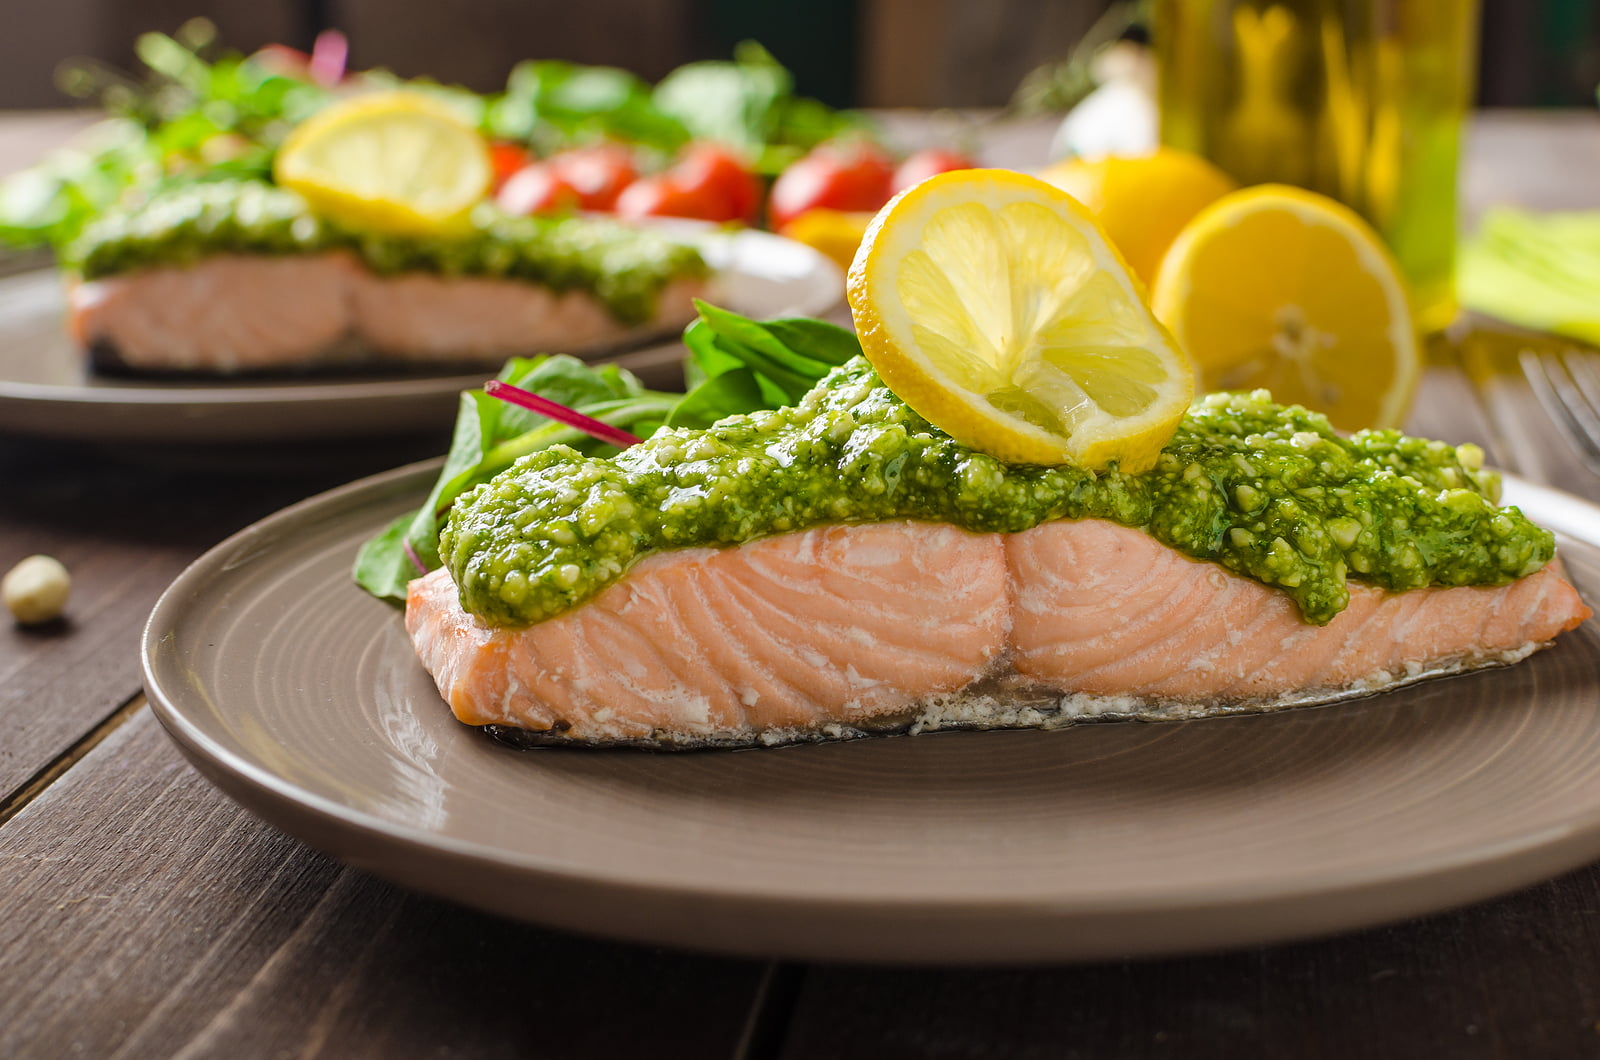 Yum: Dyan’s salmon recipe with julienned vegetables + pumpkin seed pesto